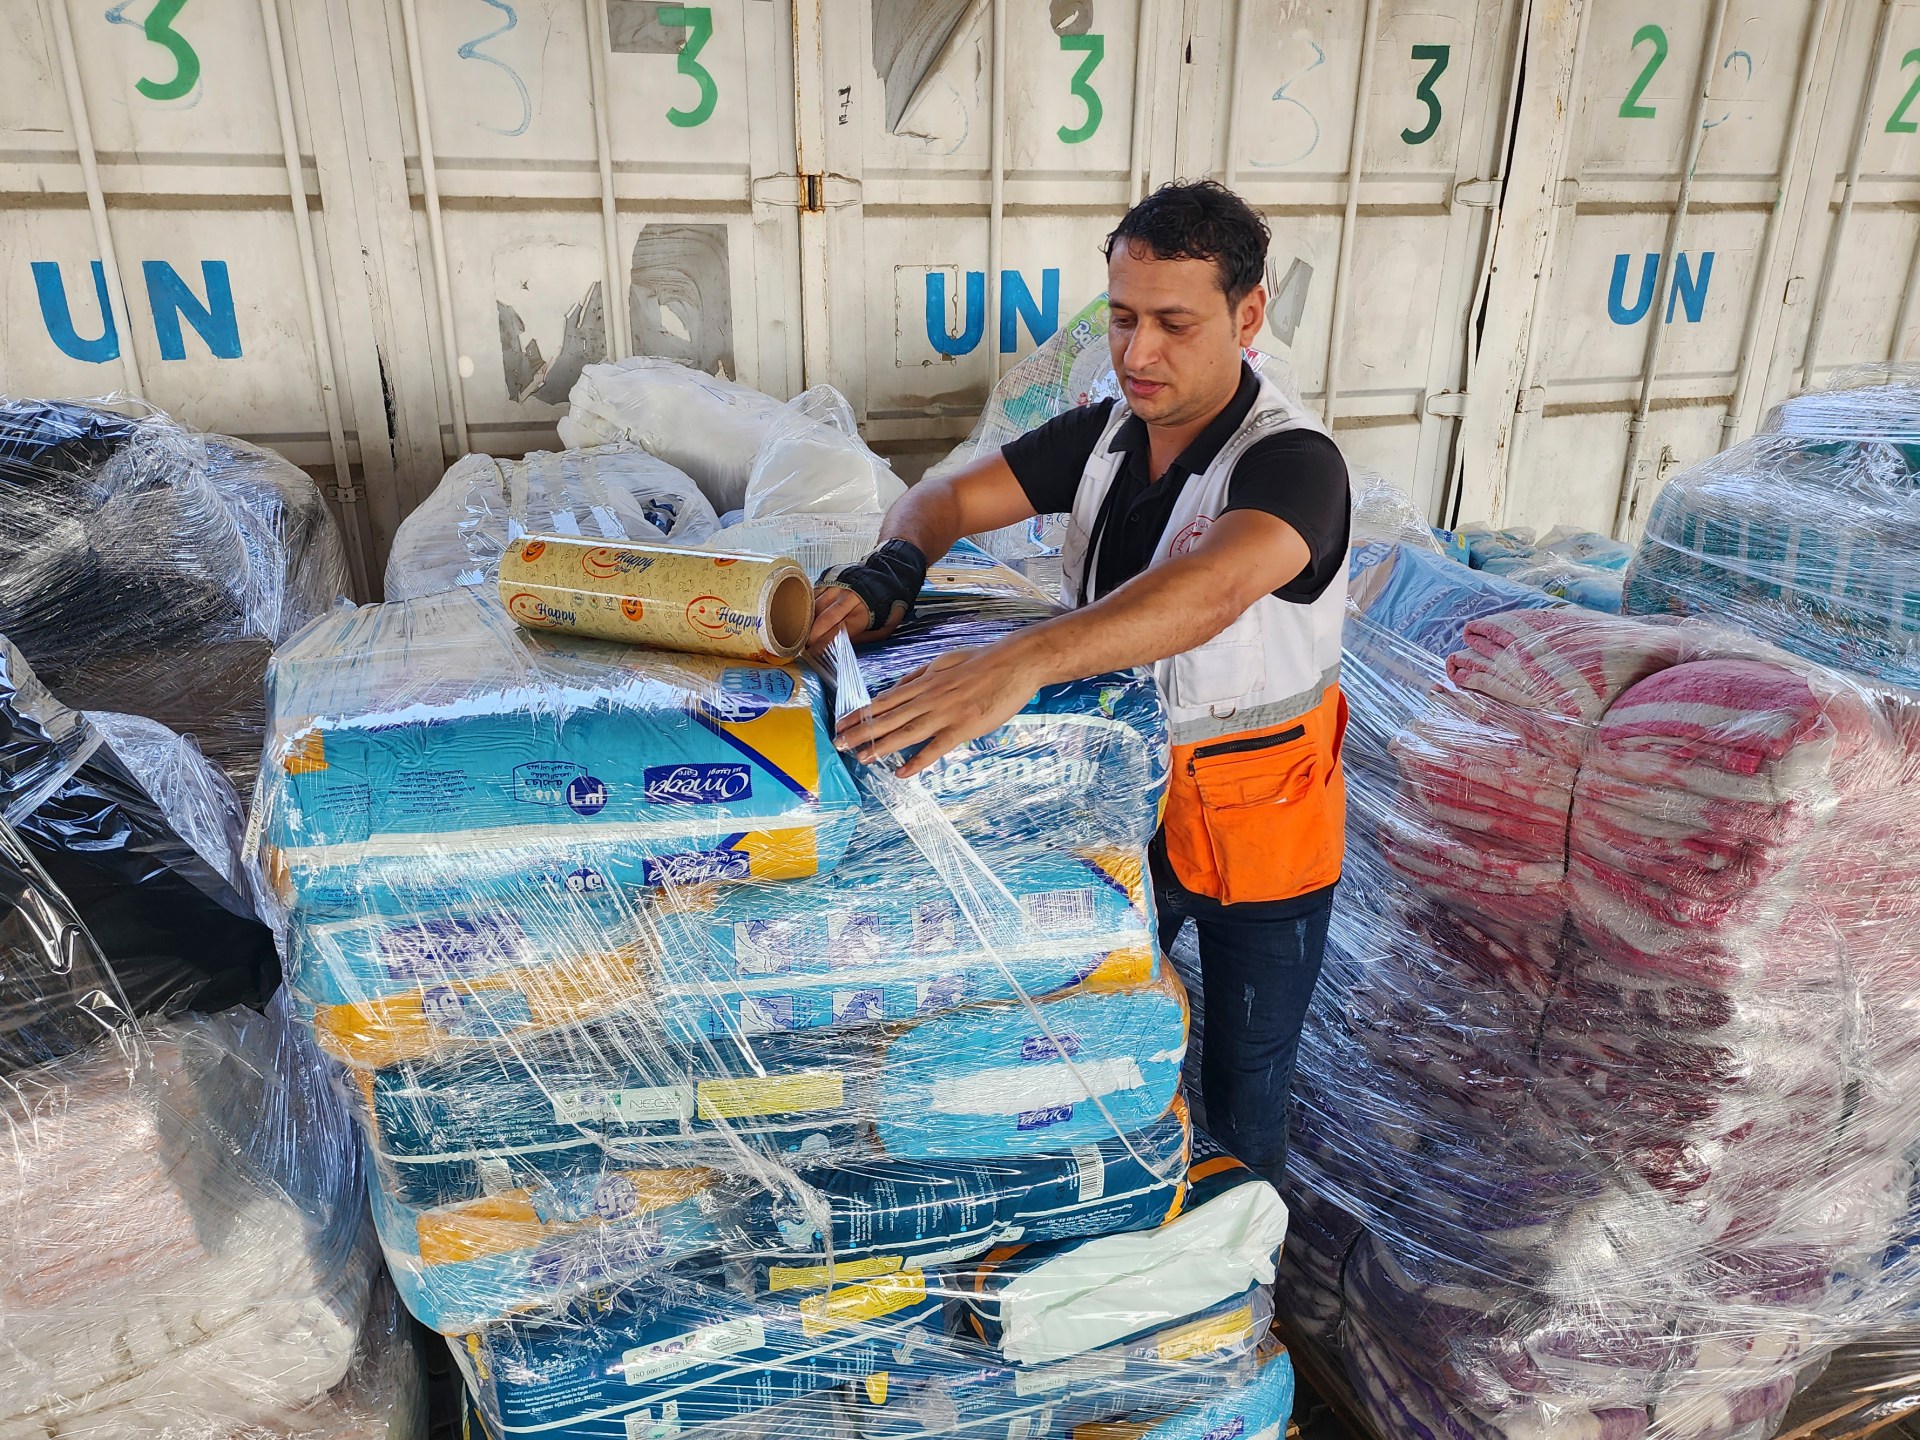 Palestinians storm UN aid warehouses in Gaza in a sign of desperation  Gaza News